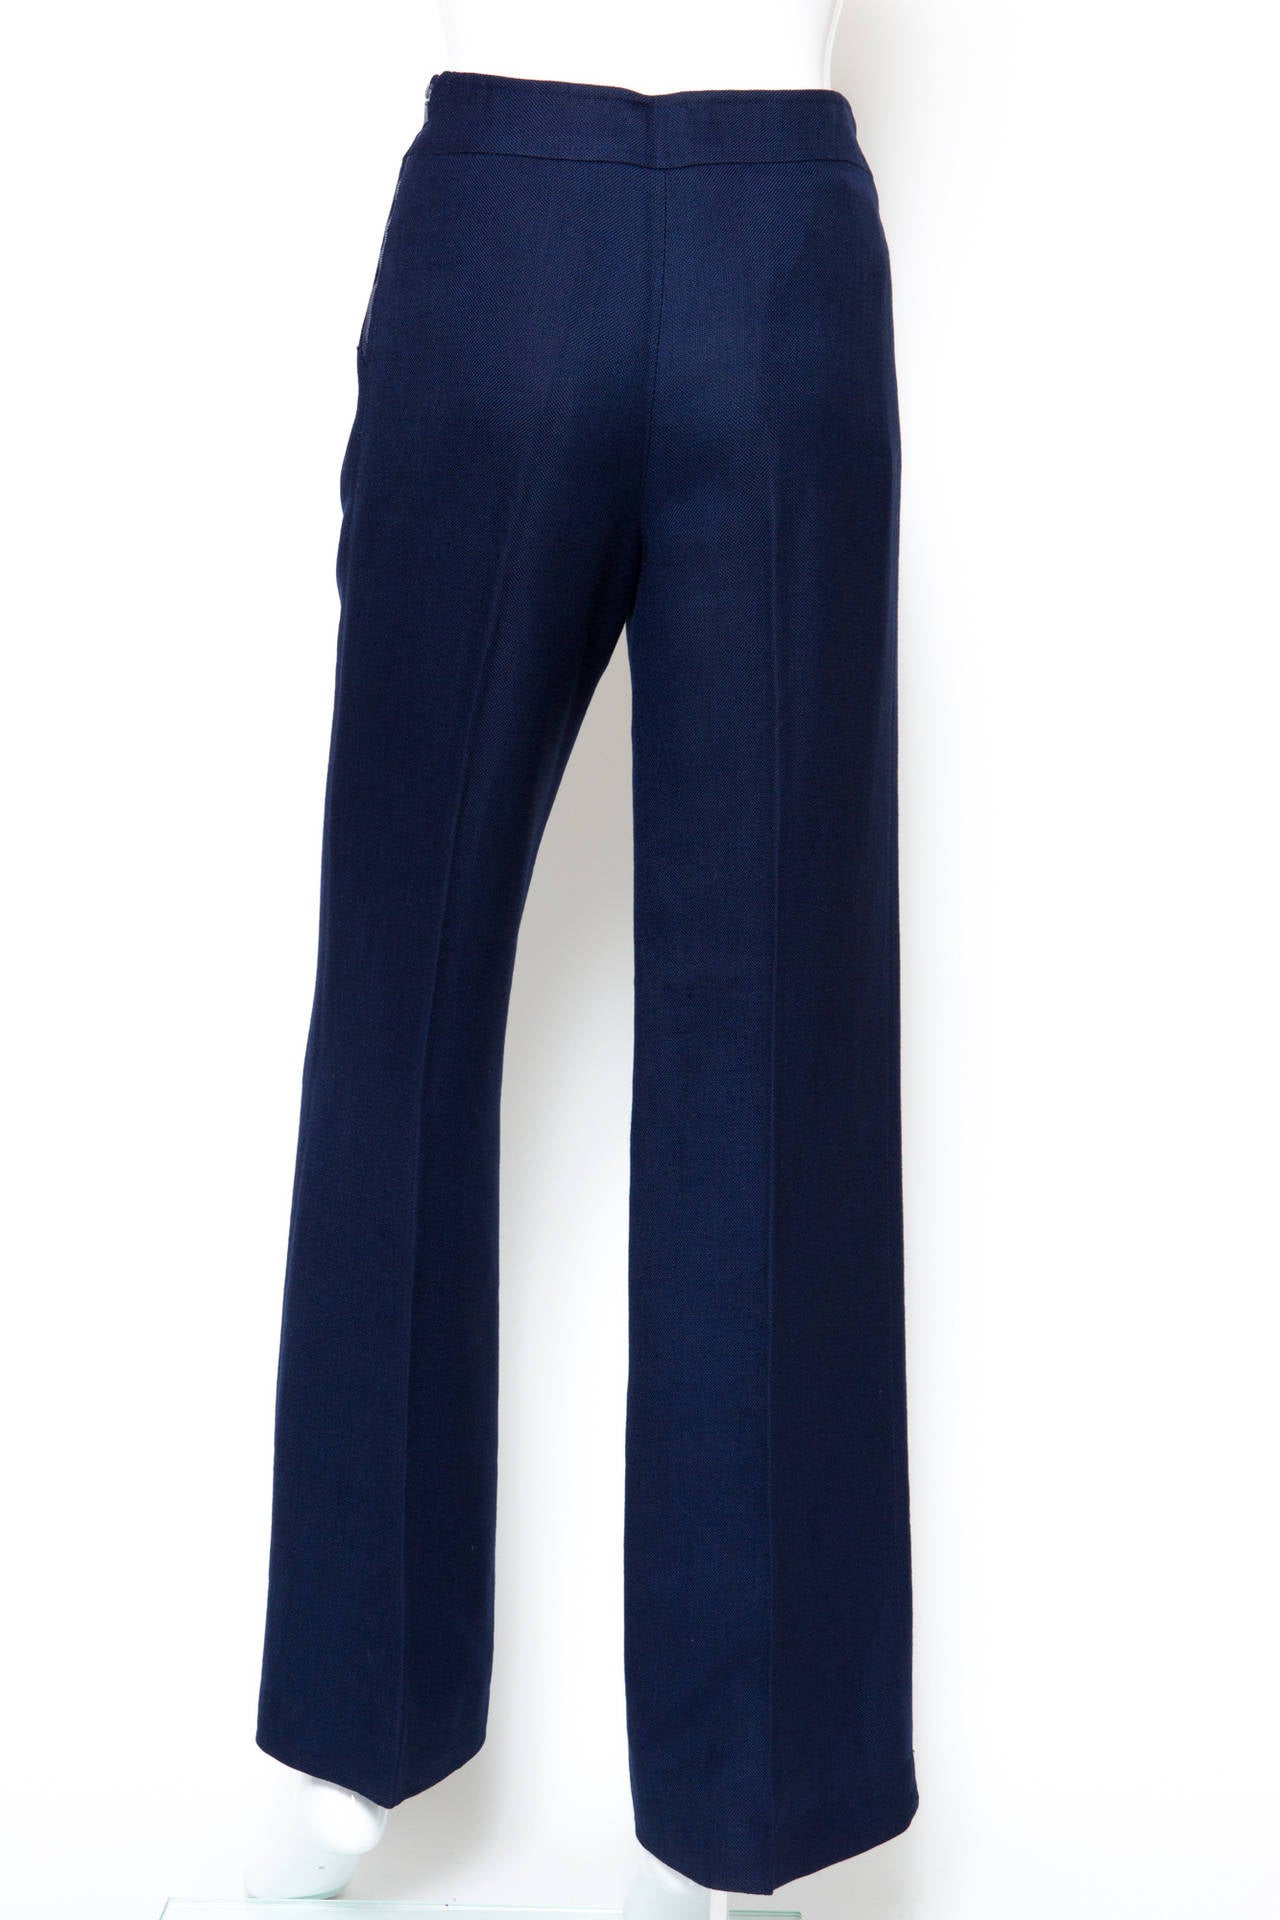 Women's 1970s Courrèges High Waisted Flared Trousers